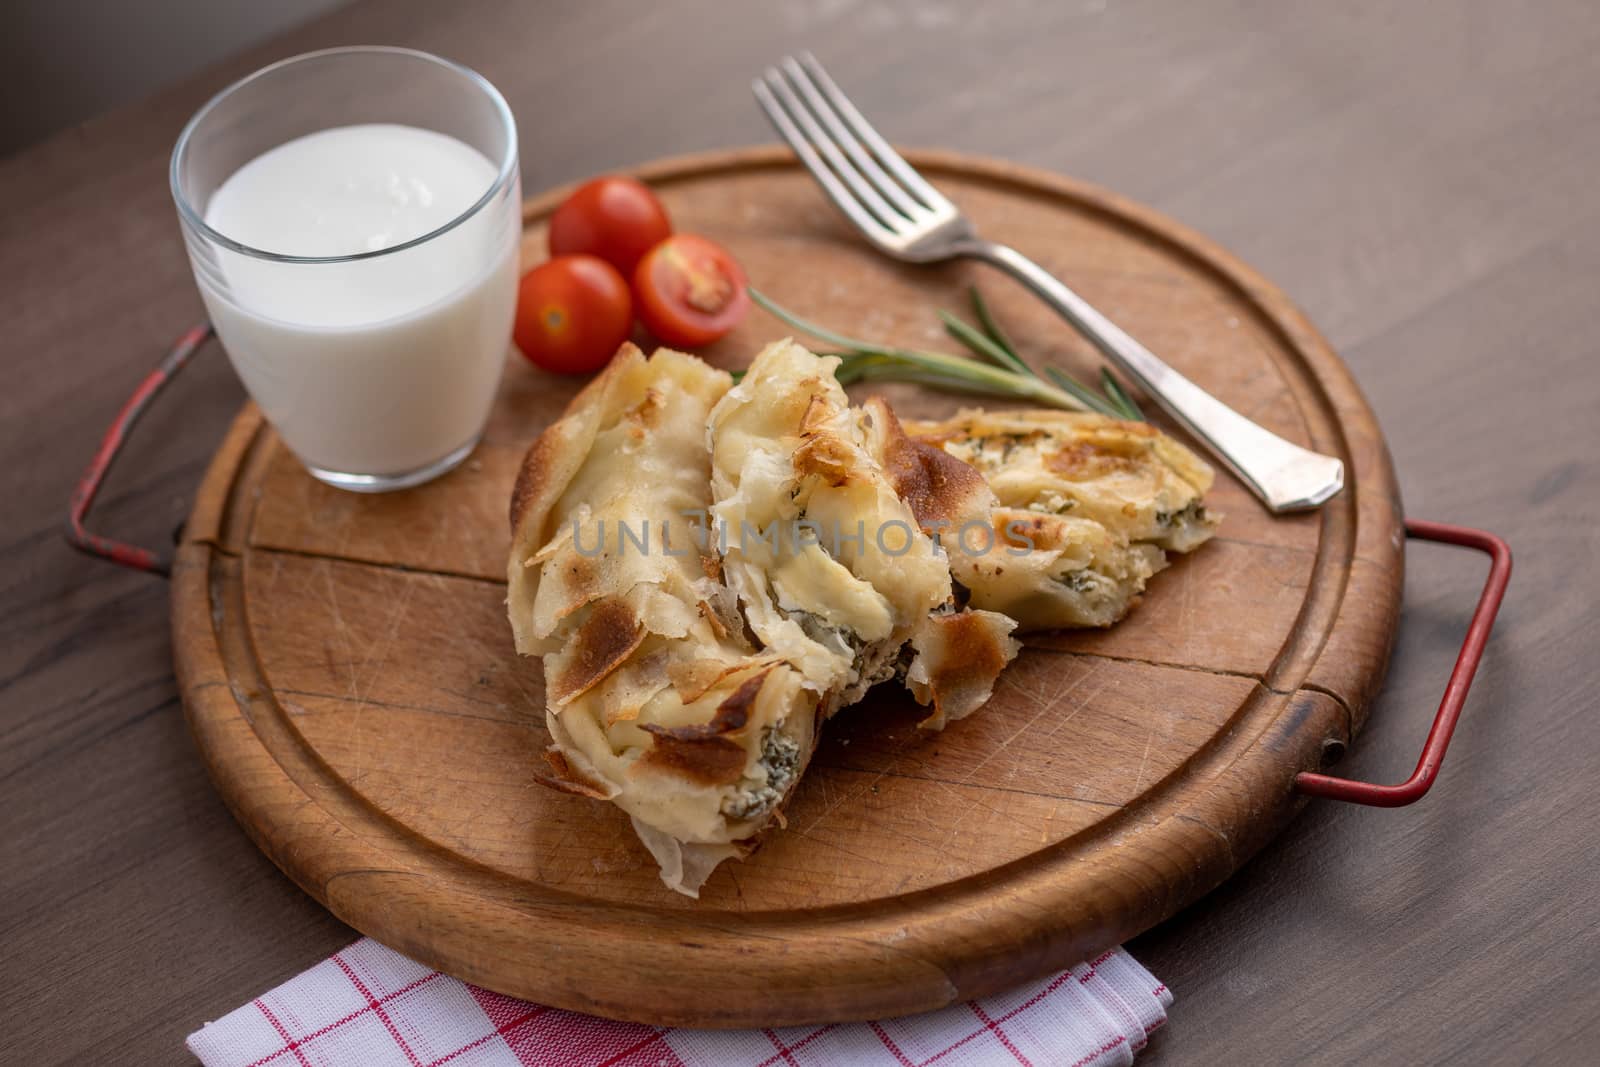 Traditional balkan breakfast - Burek pie with cheese and spinach served on vooden table